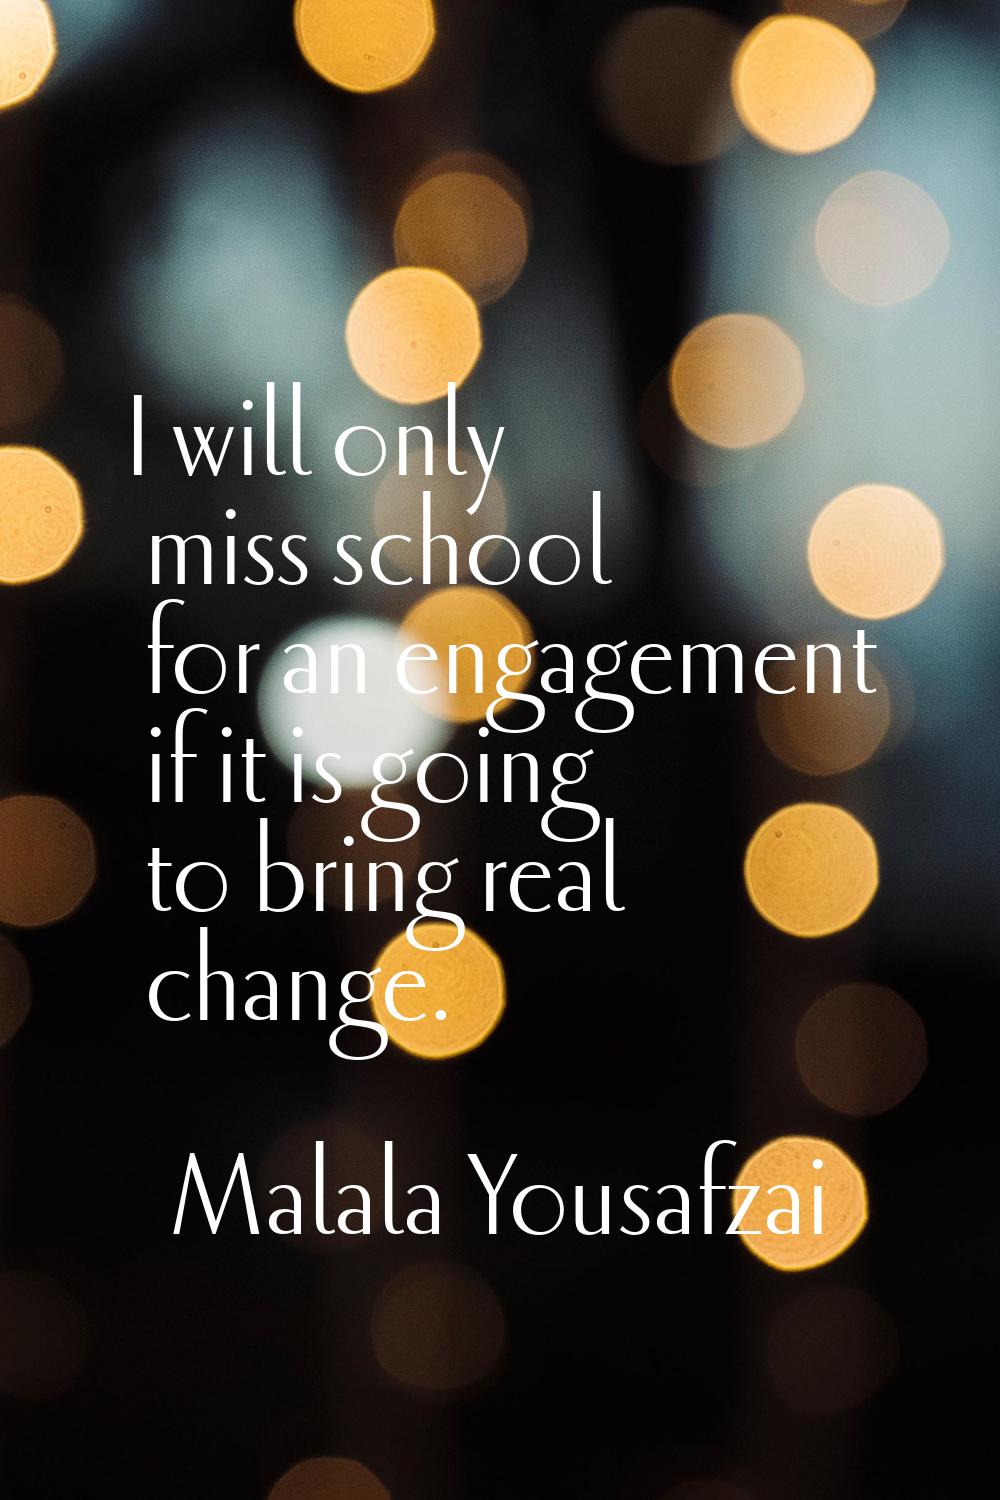 I will only miss school for an engagement if it is going to bring real change.